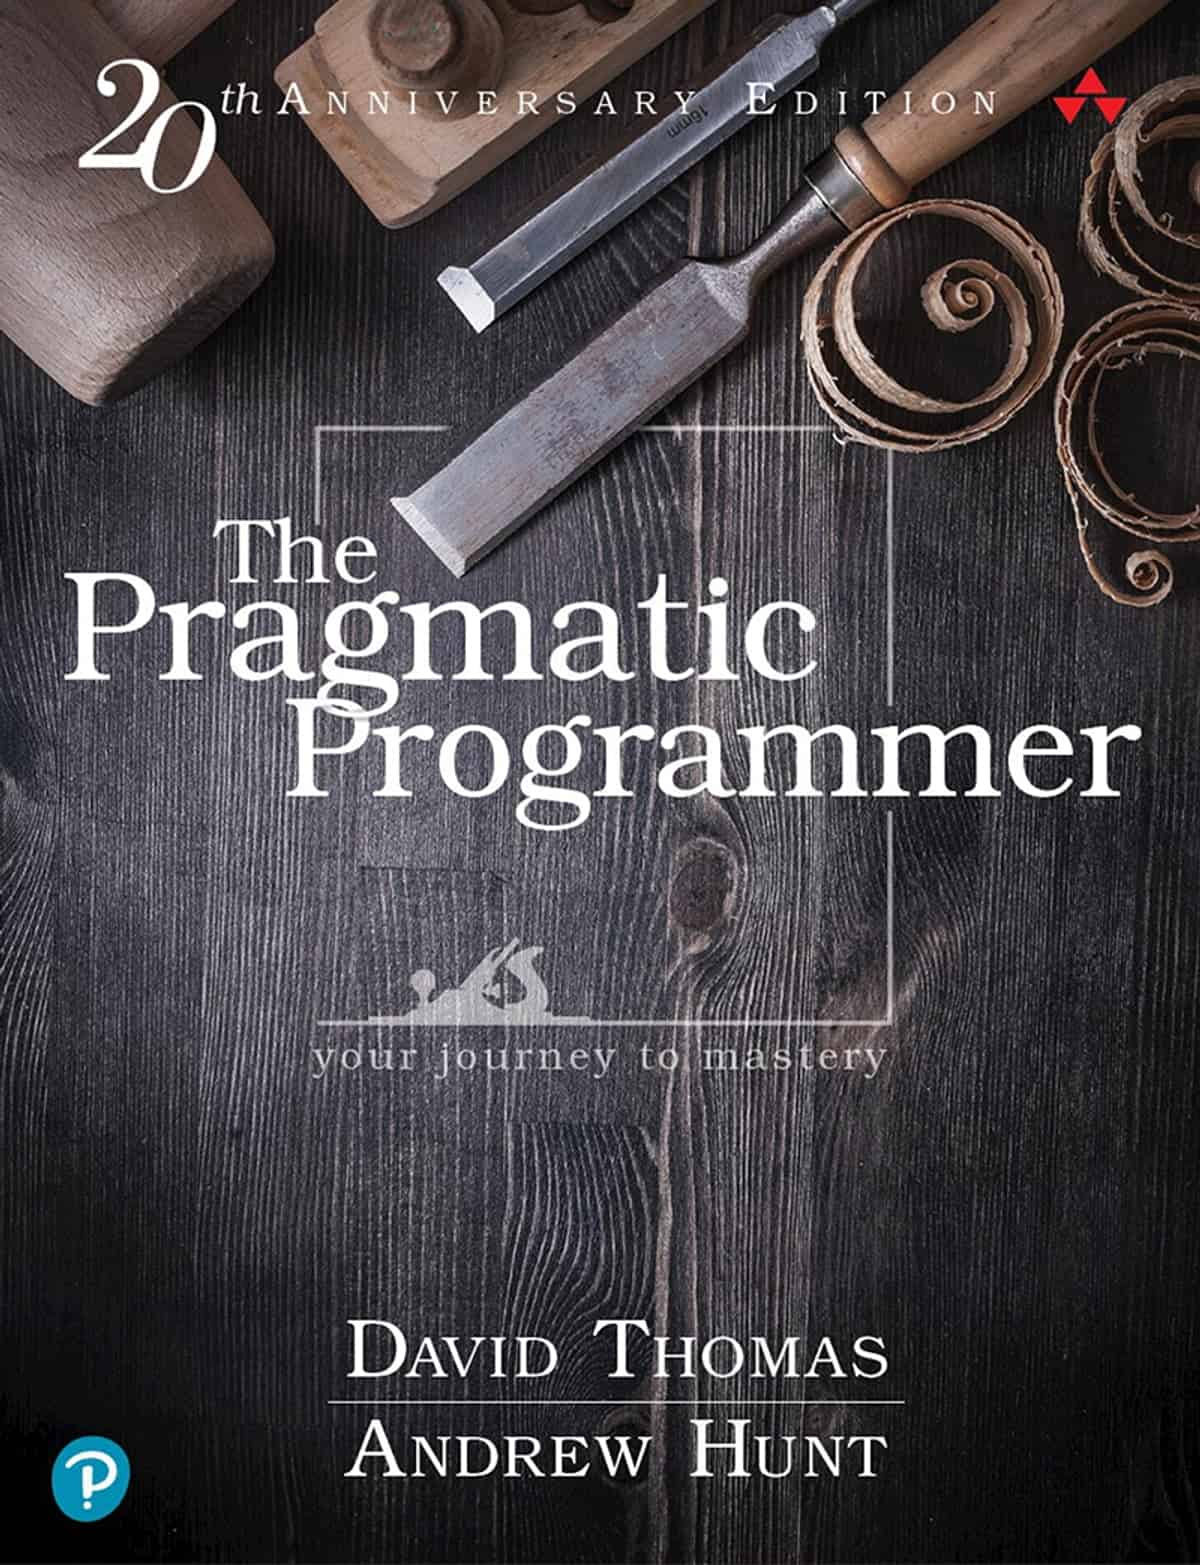 Book cover of " The Pragmatic Programmer: Your Journey to Mastery"